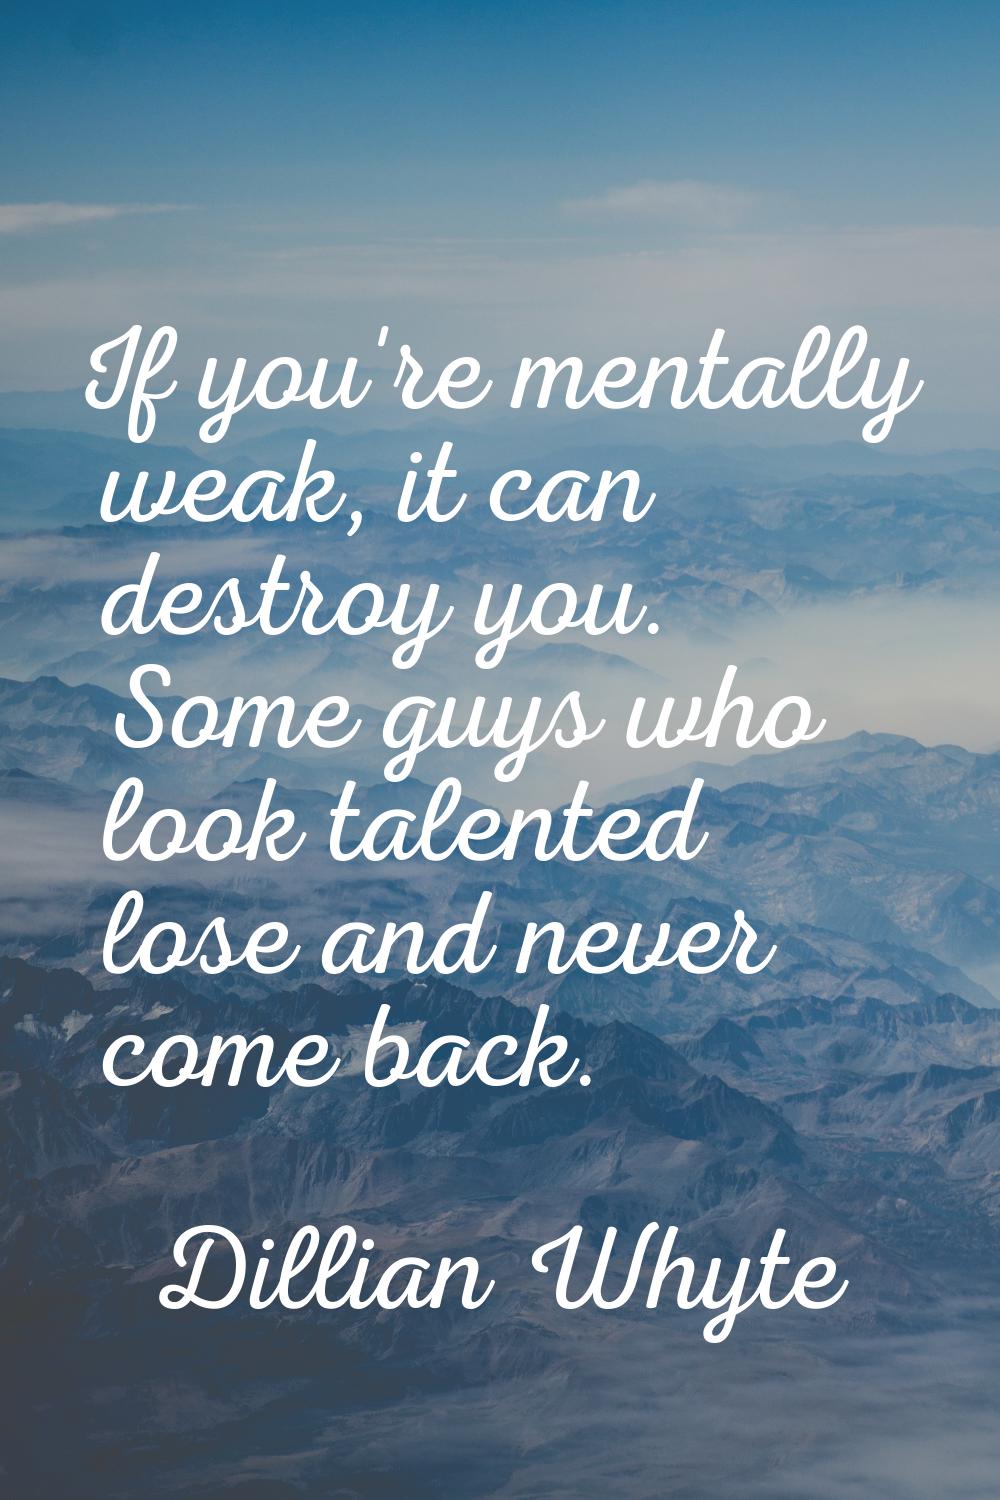 If you're mentally weak, it can destroy you. Some guys who look talented lose and never come back.